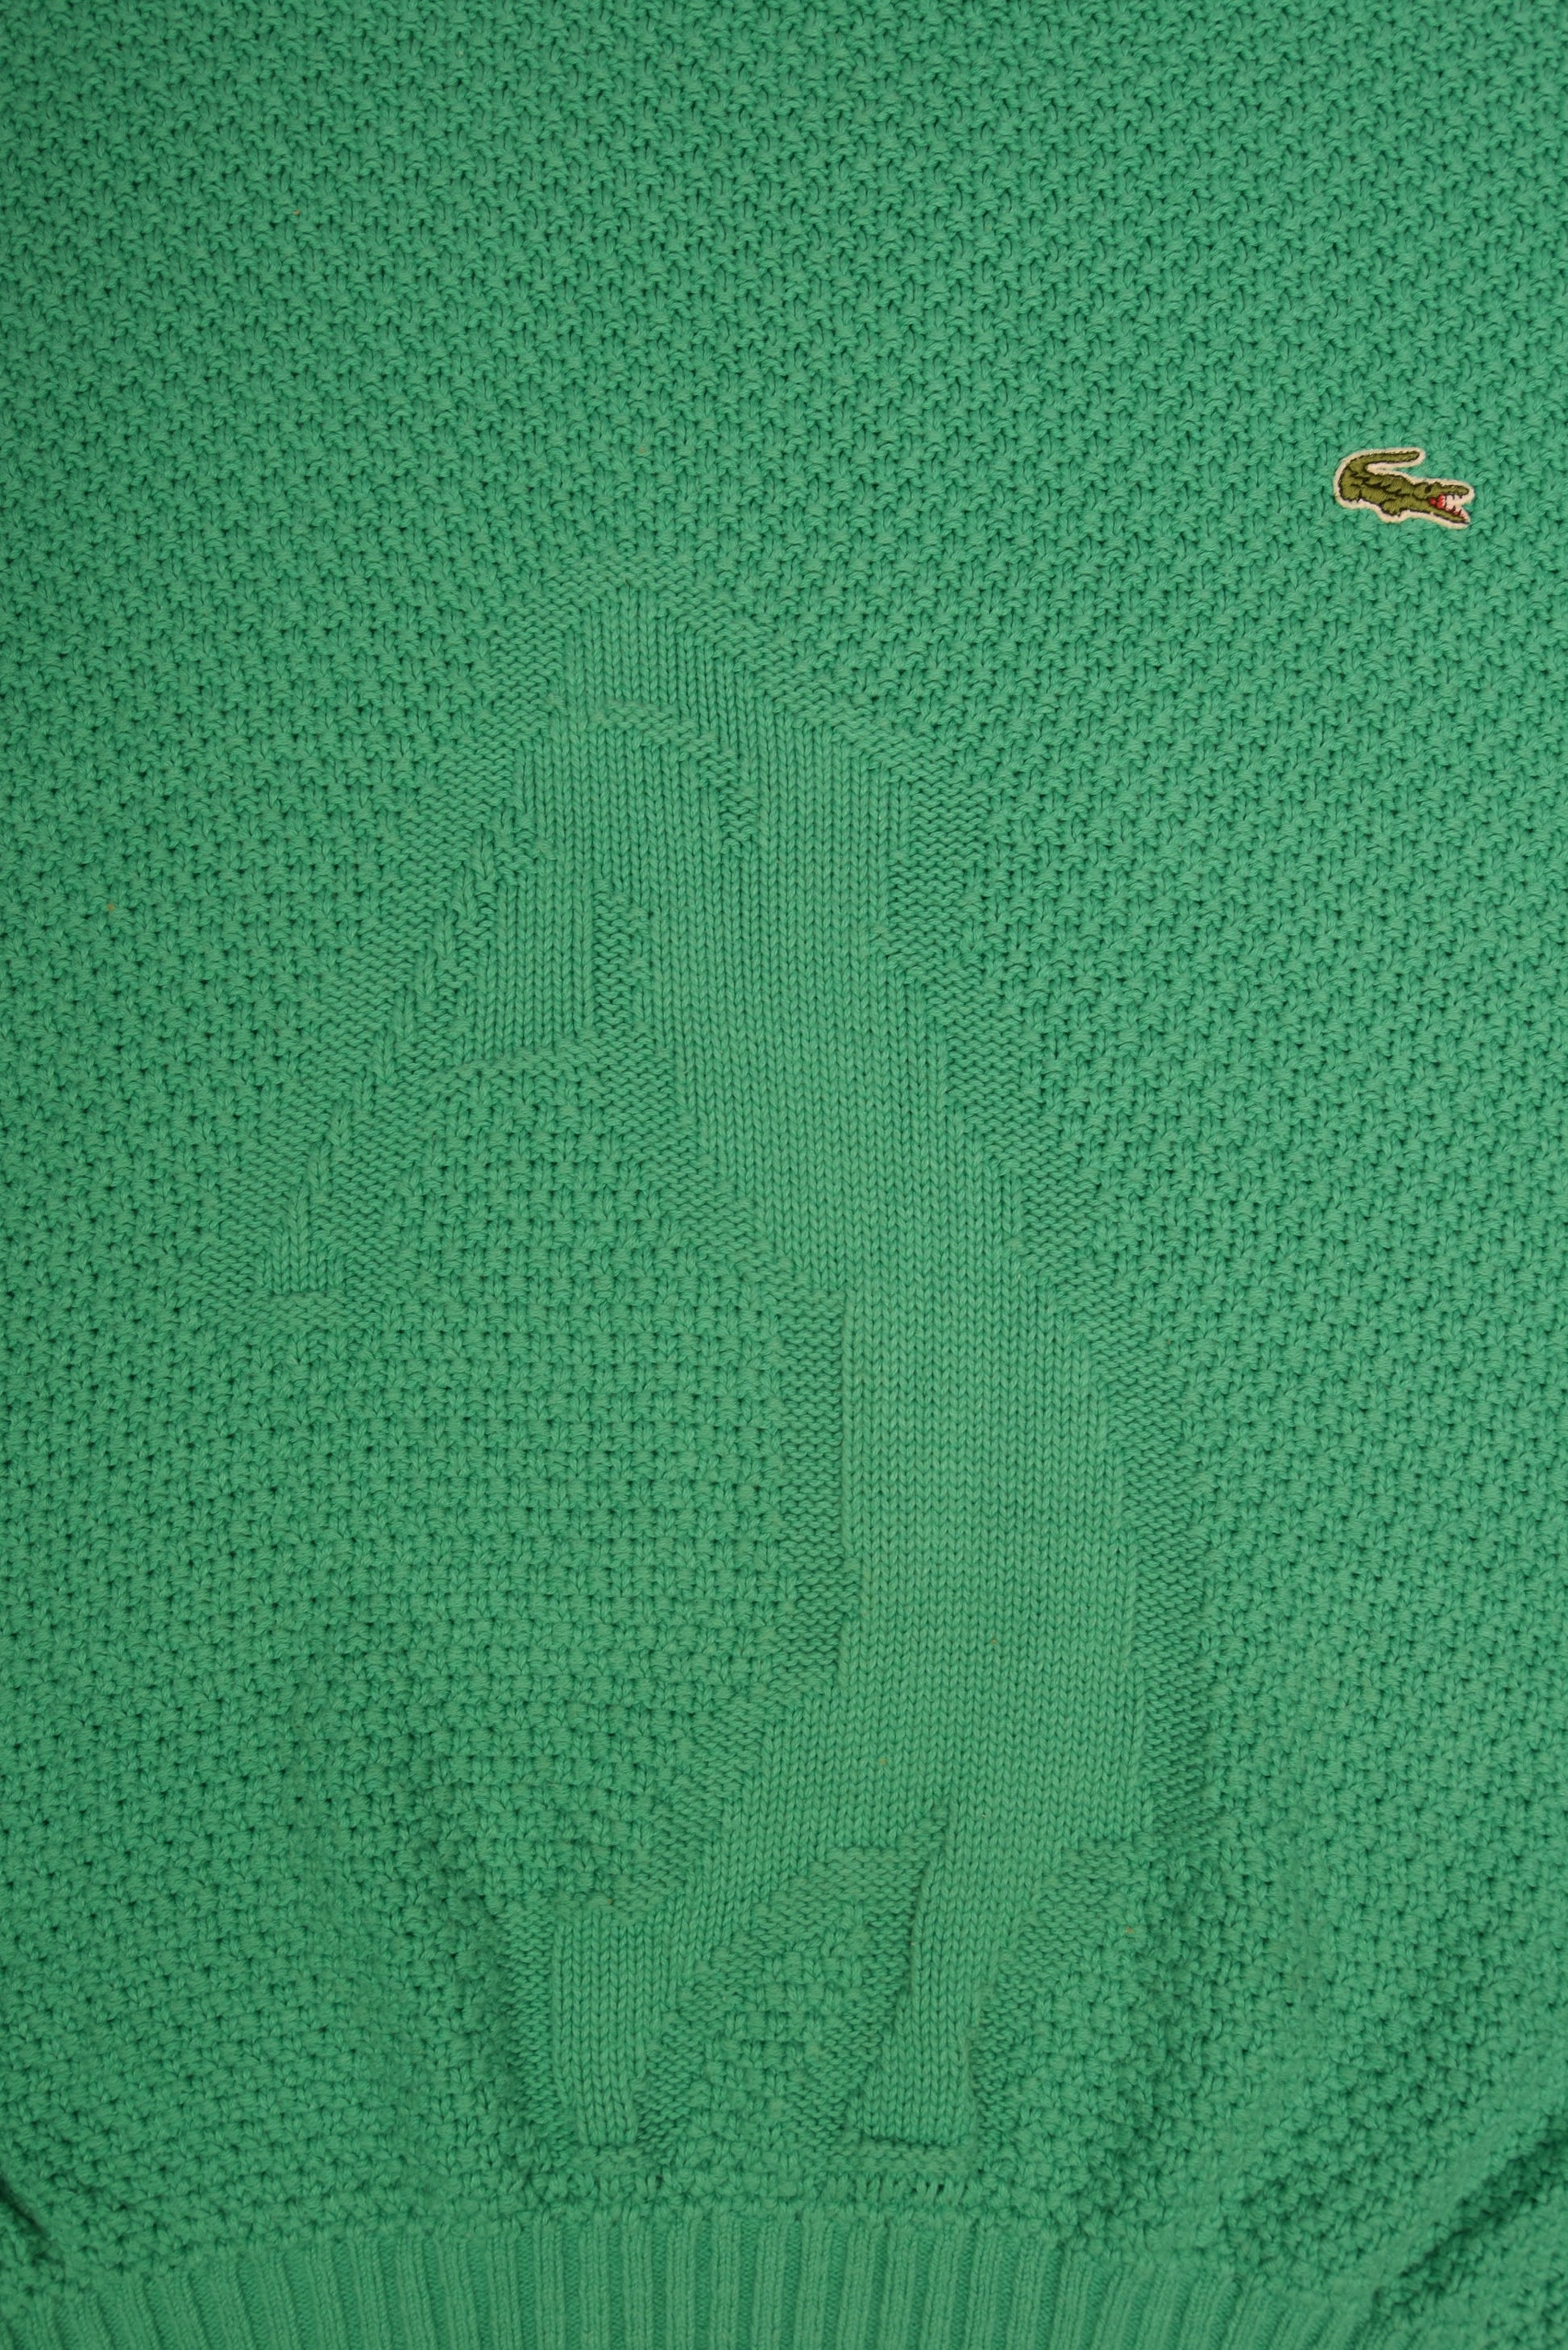 Vintage 80's Lacoste Chemise Made in France Green Golf Player Size S-M Cotton